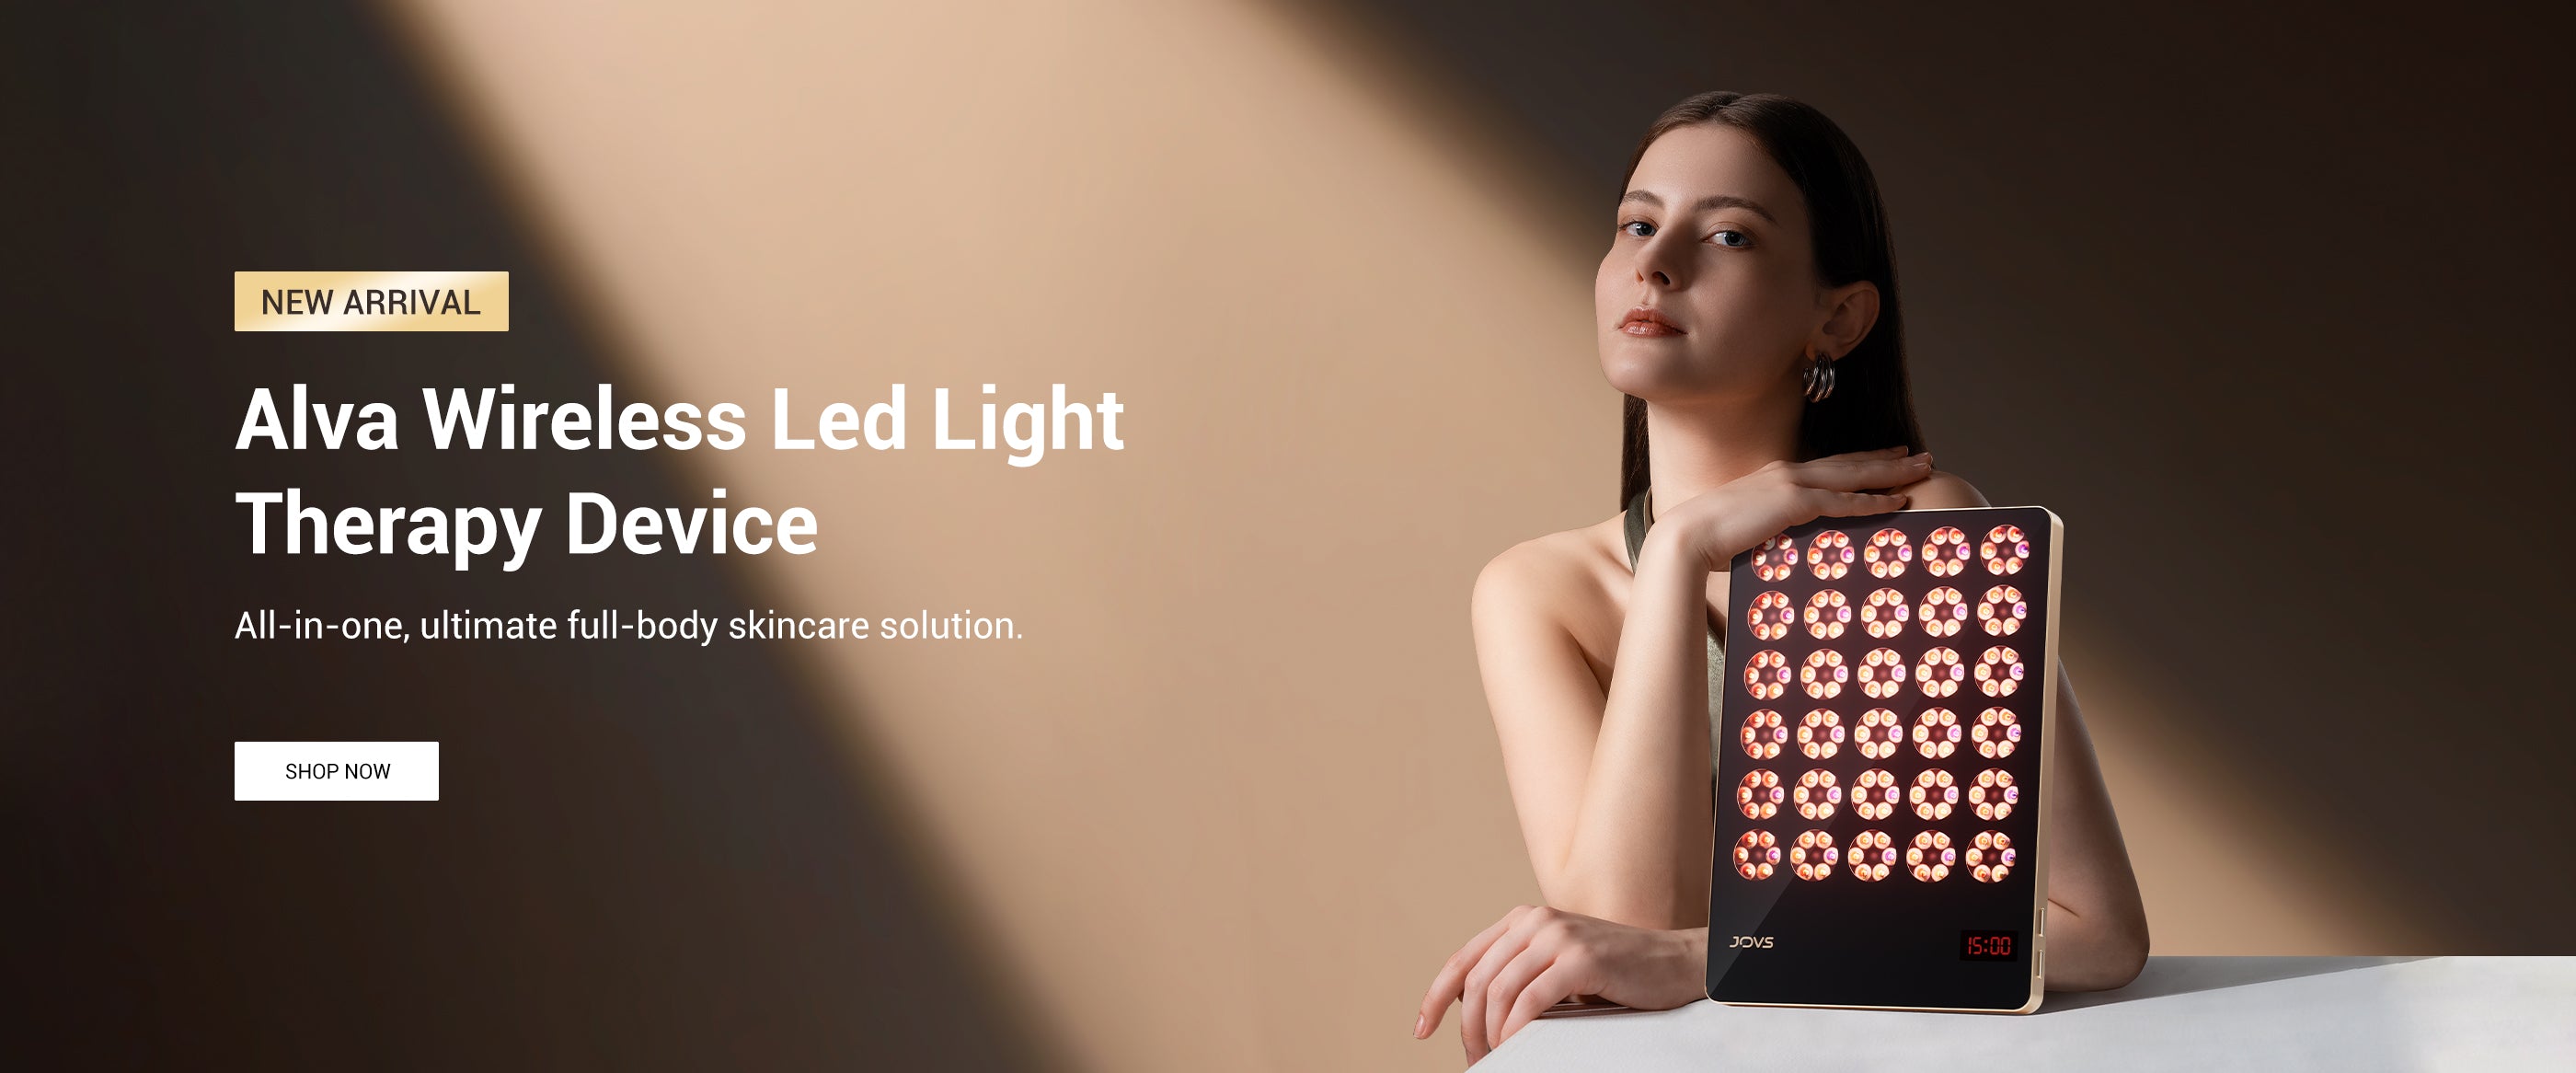 Elegant model presenting the new Alva Wireless LED Light Therapy Device by JOVS, an all-in-one solution for full-body skincare.